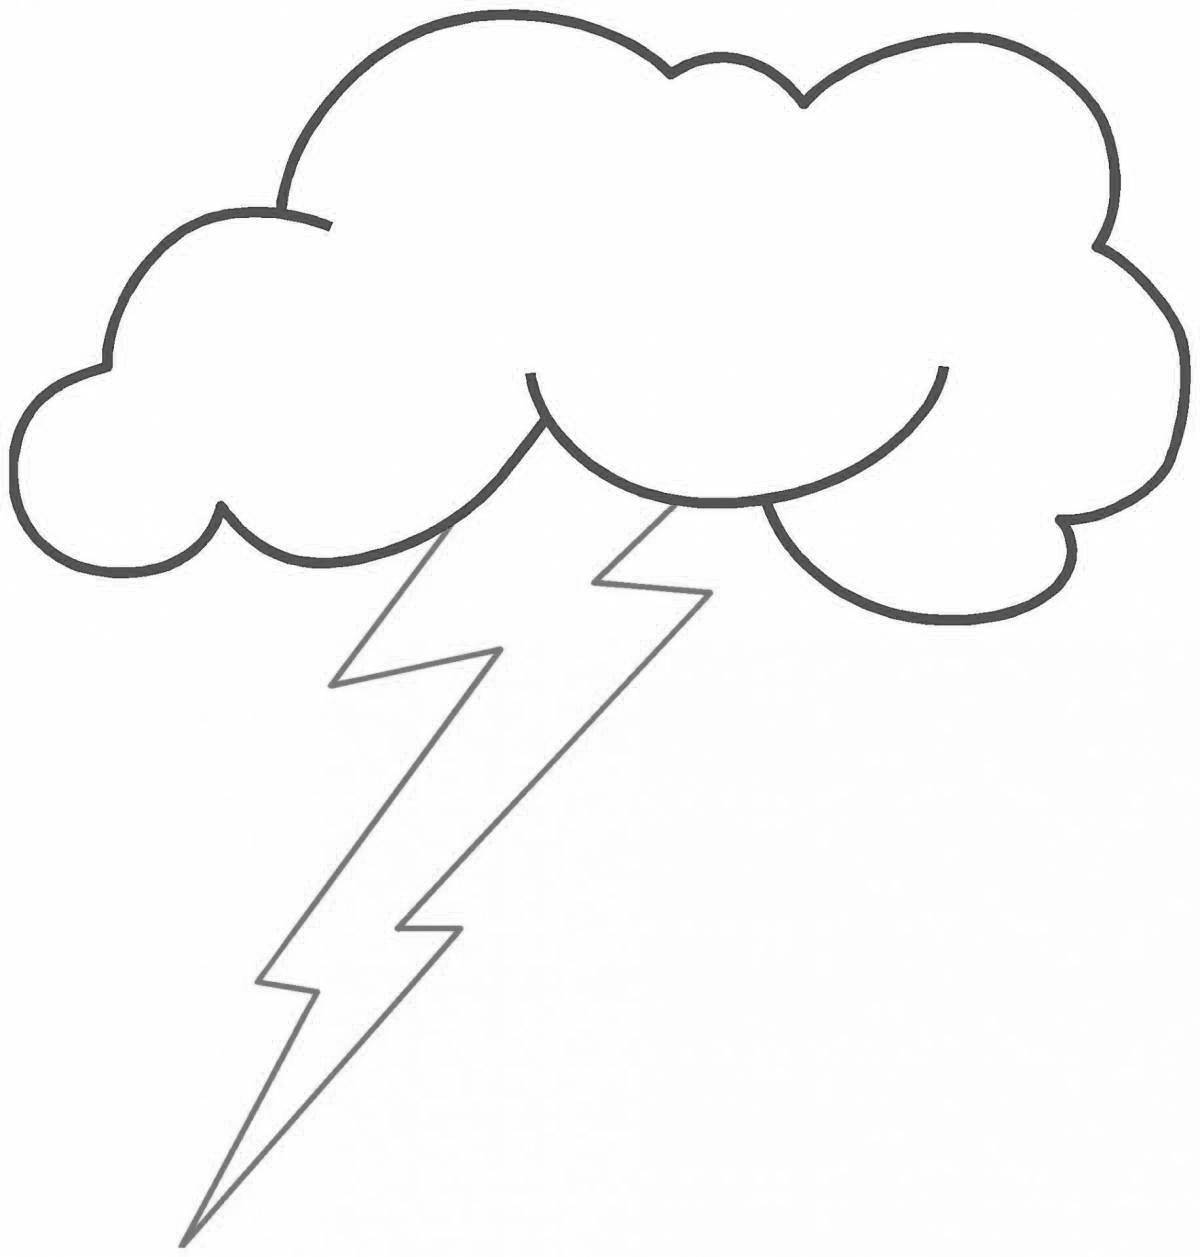 Merry thunderstorm coloring book for kids